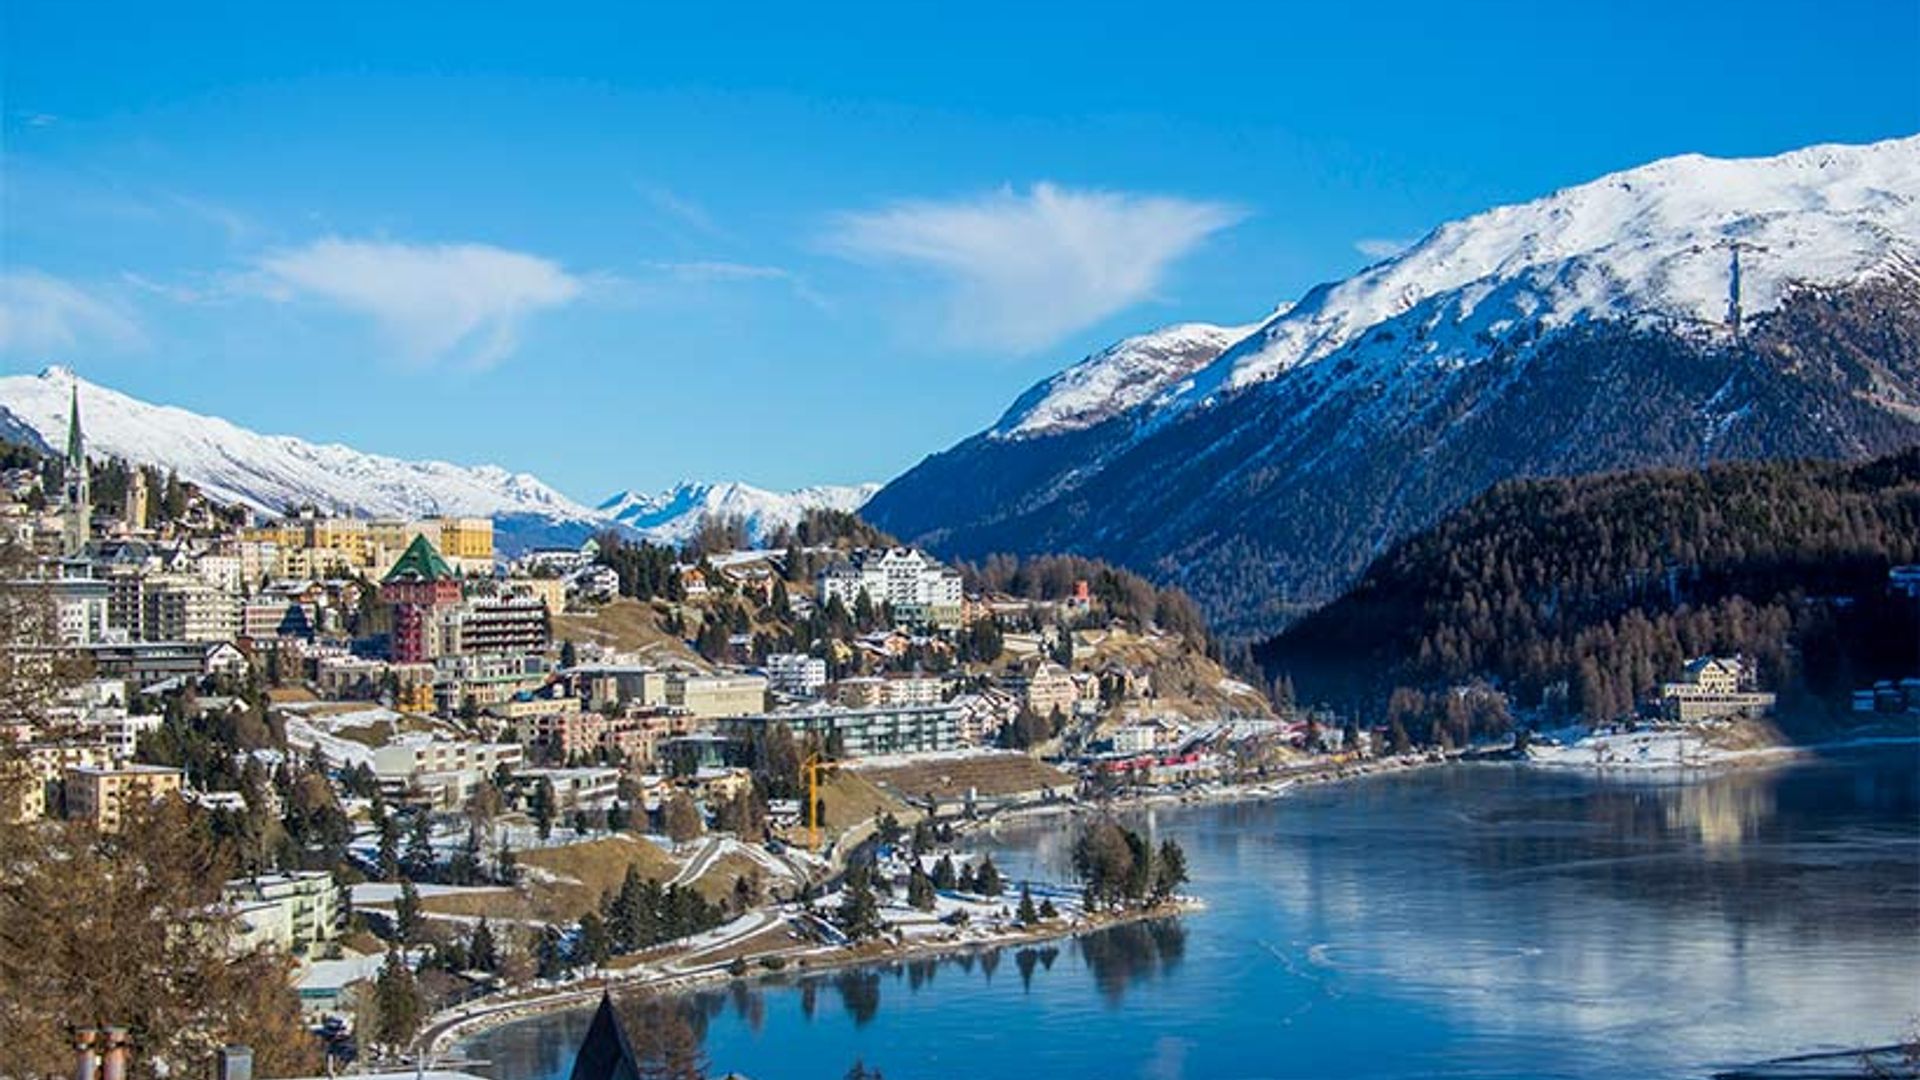 St Moritz: Find out why Kate Moss loves the ski resort in the heart of the Swiss Alps